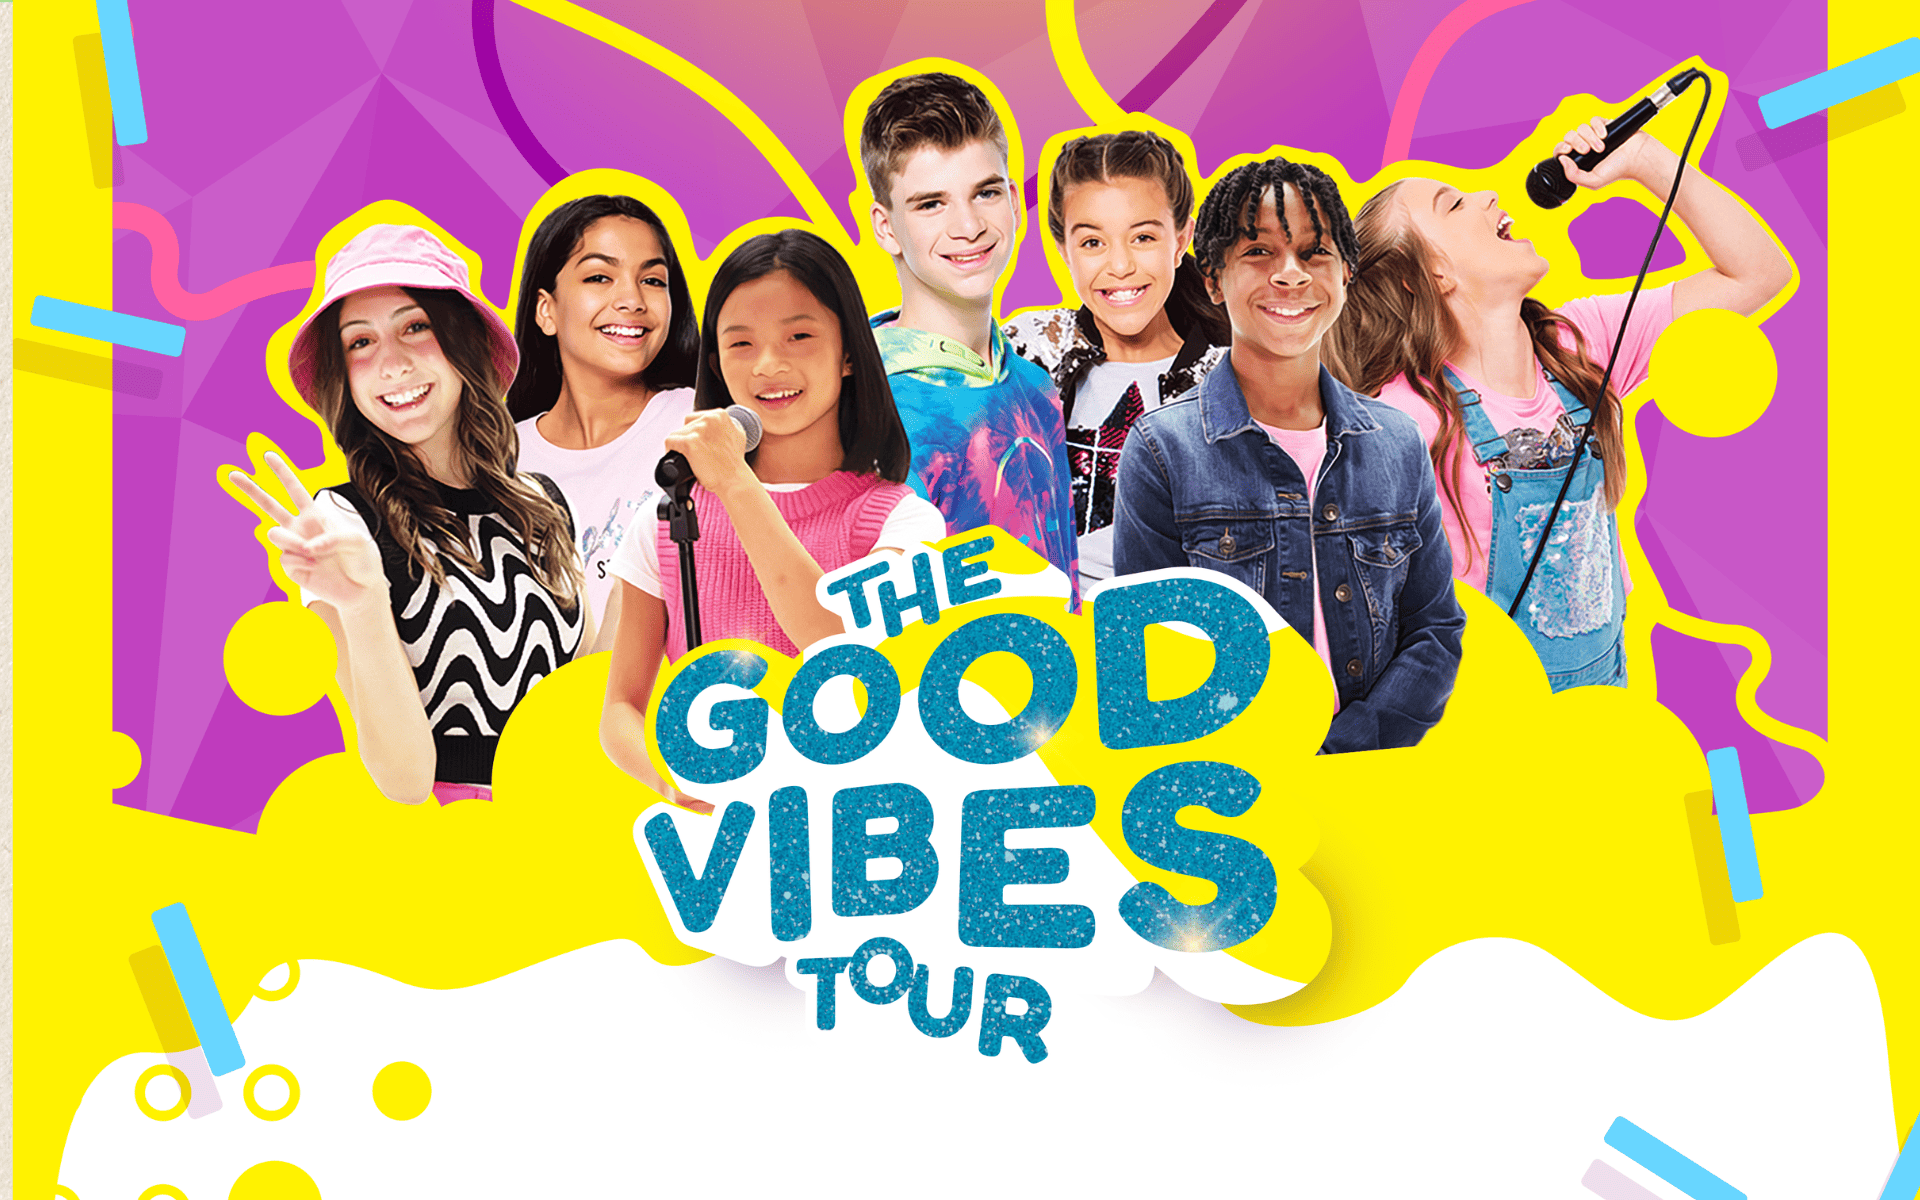 Poster reading "The Good Vibes Tour" with child performers pictured